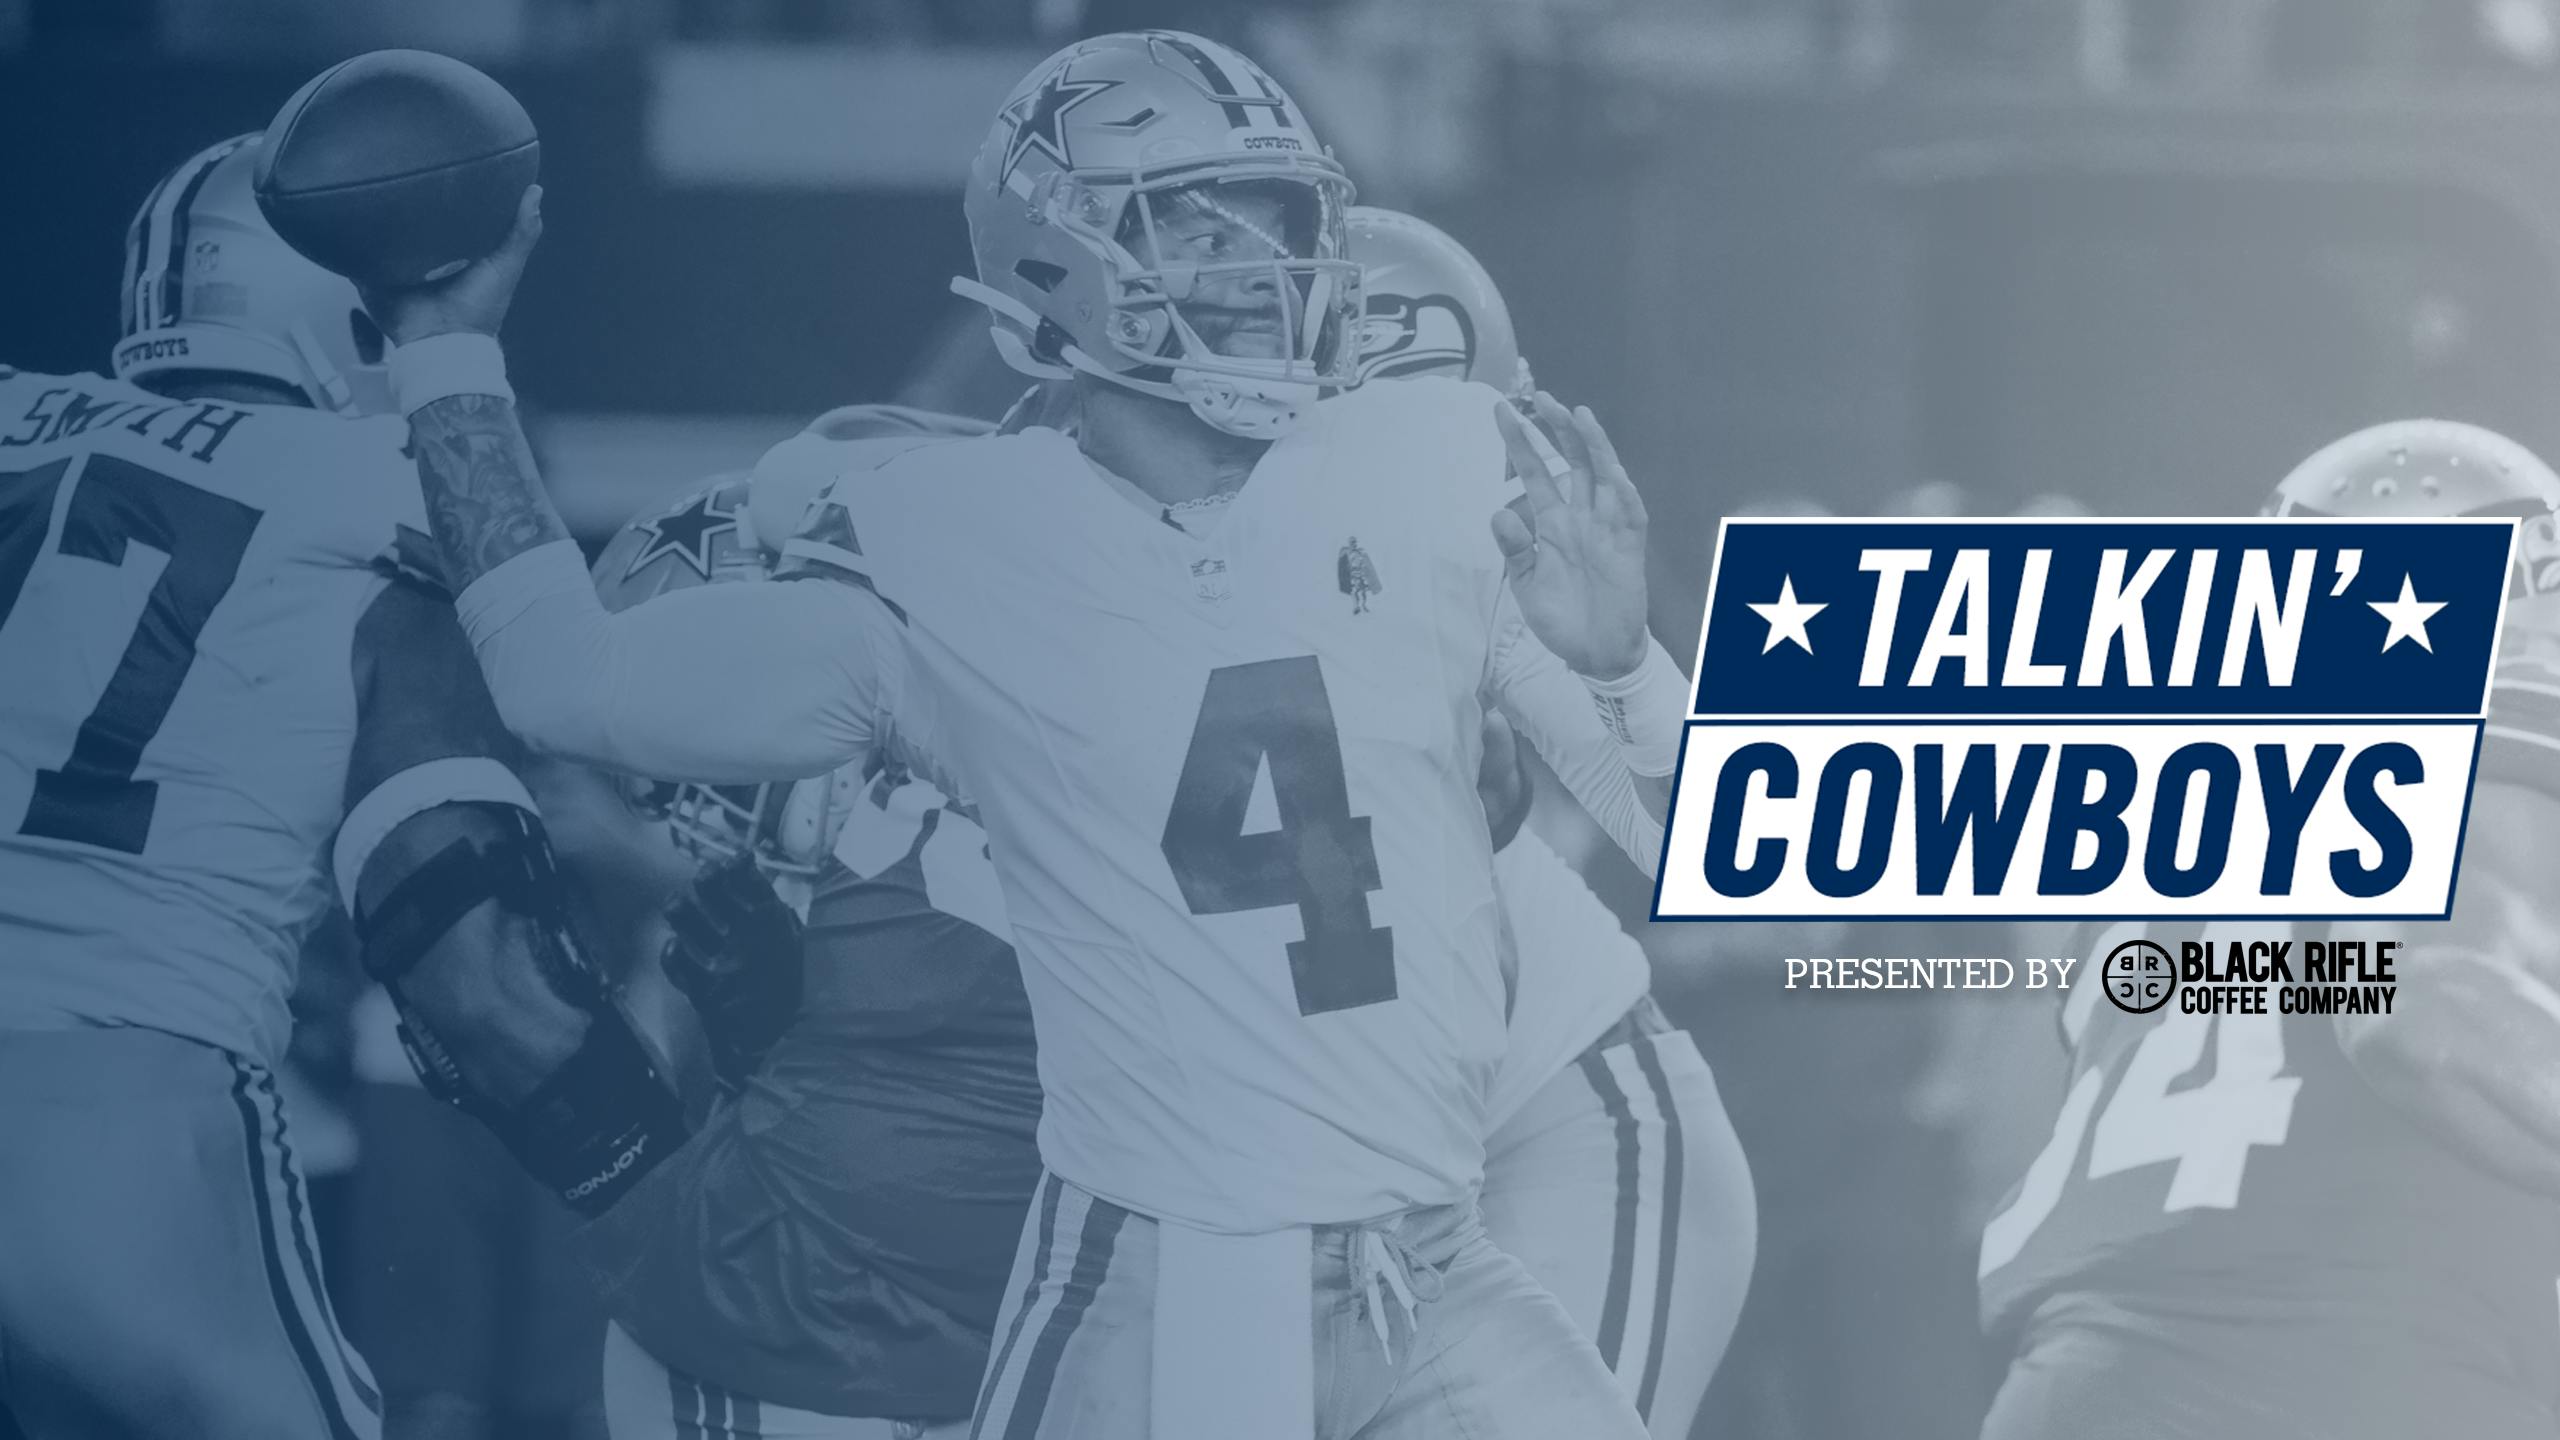 Talkin’ Cowboys: Standing on Business